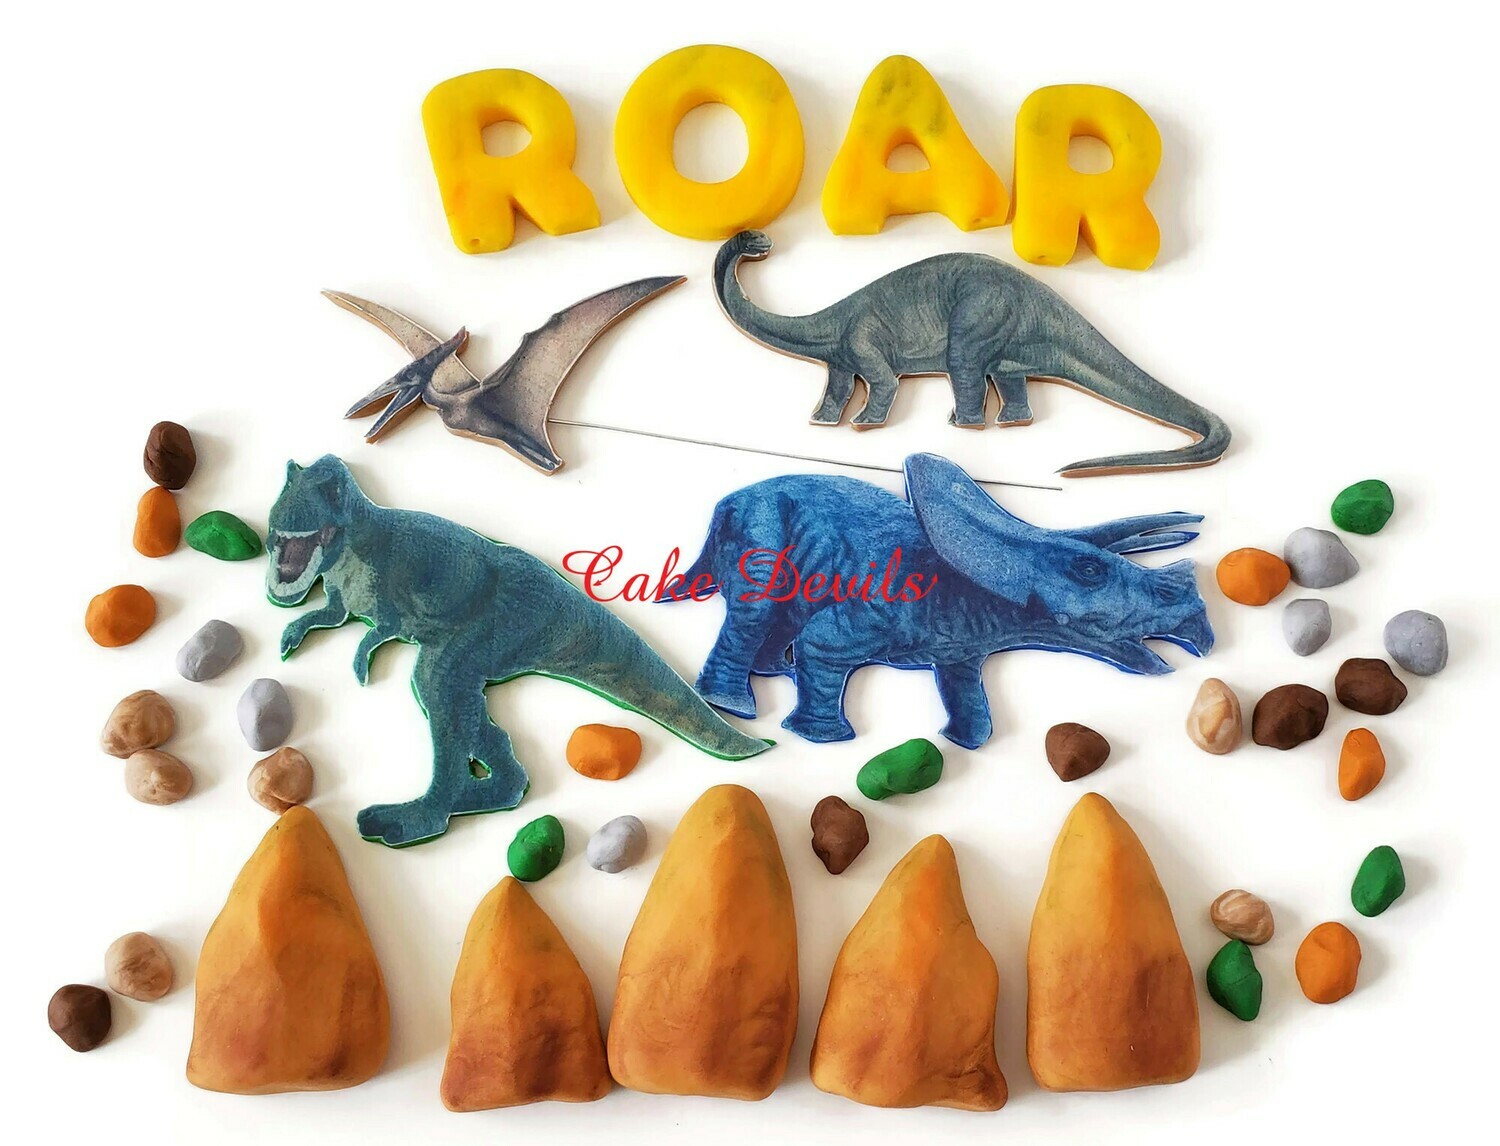 Fondant and Edible Image Dinosaur themed Cake Toppers, brontosaurus, triceratops, pterodactyl, and T-rex